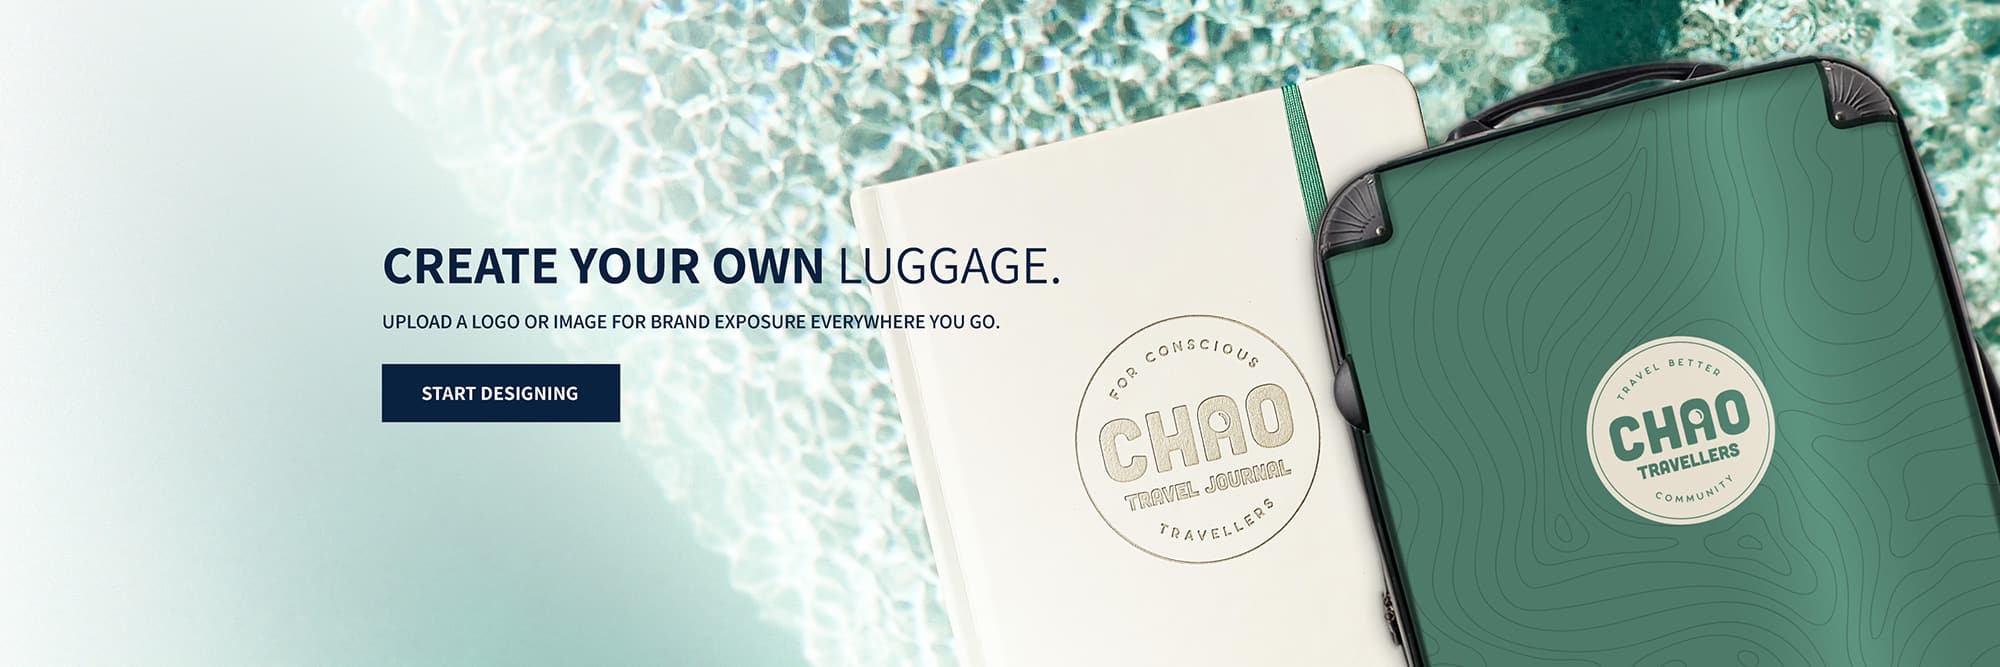 Create your own Luggage. Upload a logo or image for brand exposure everywhere you go. Start designing